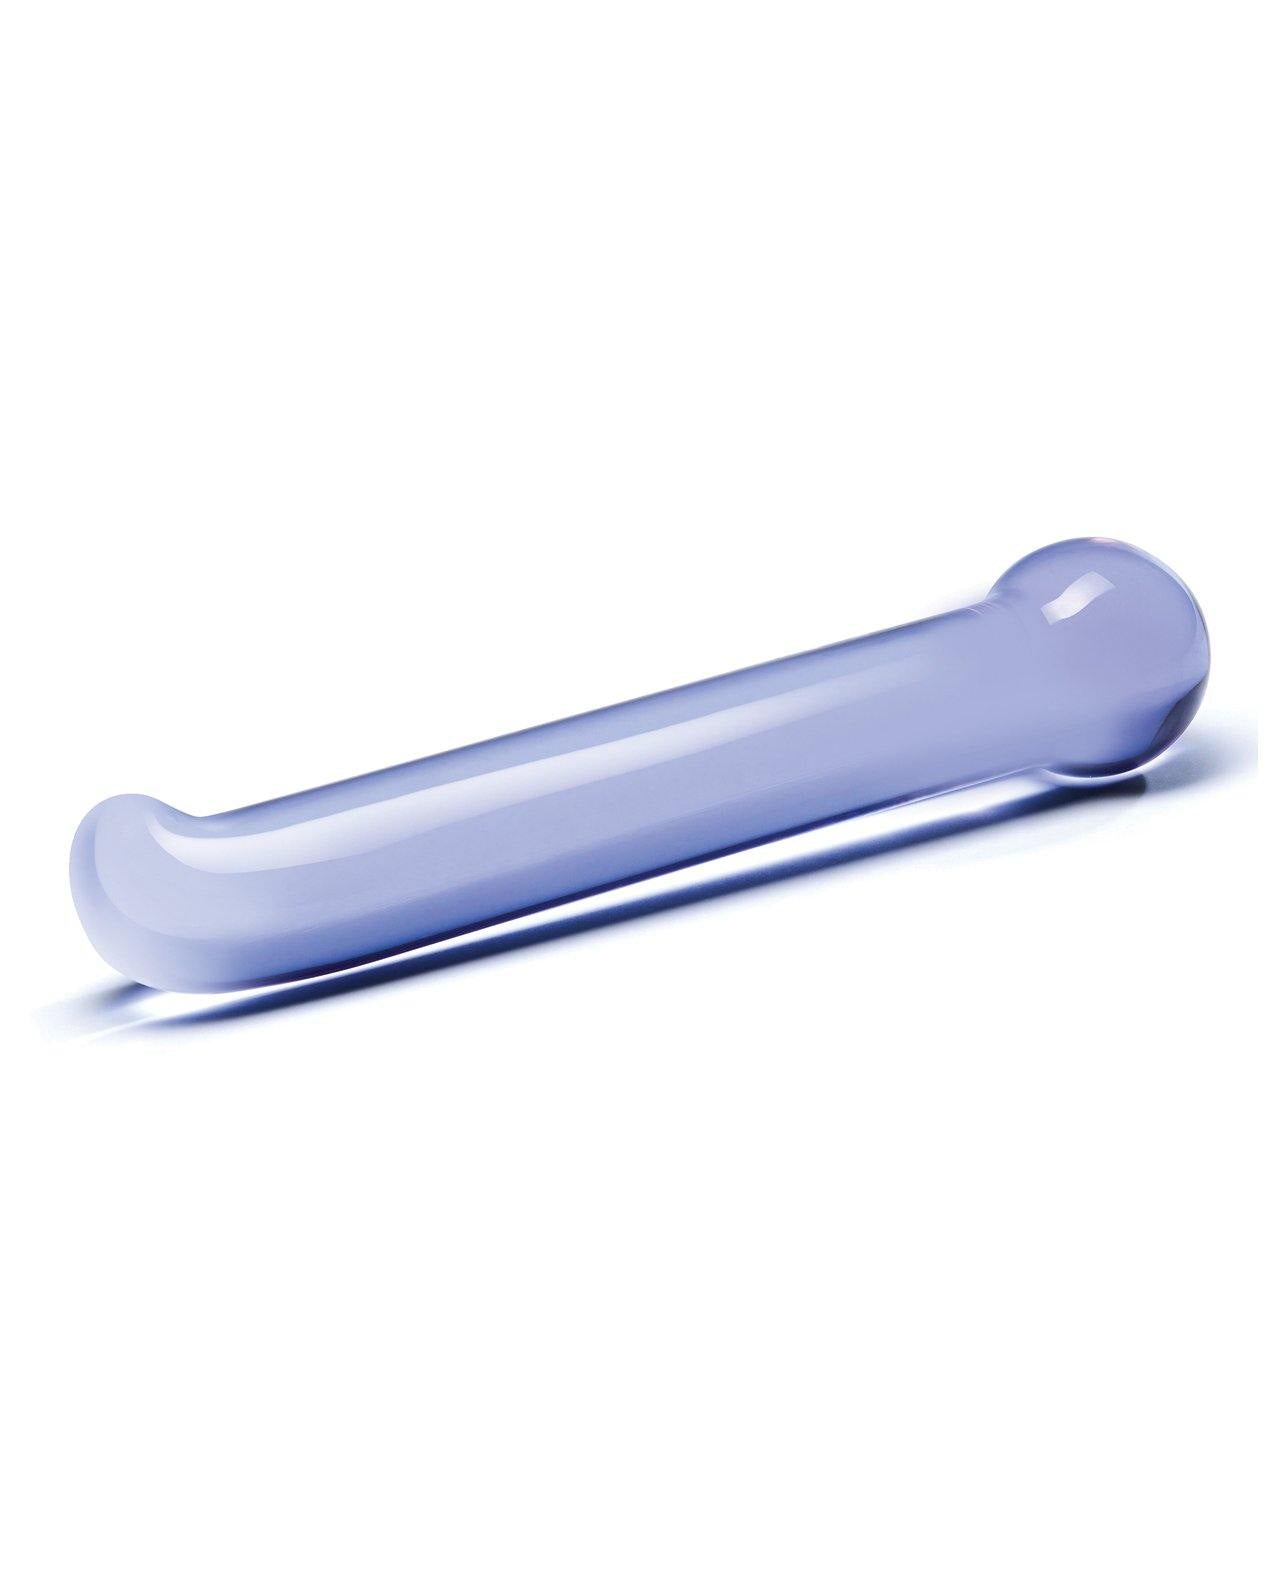 Glas G Spot Tickler - Buy At Luxury Toy X - Free 3-Day Shipping